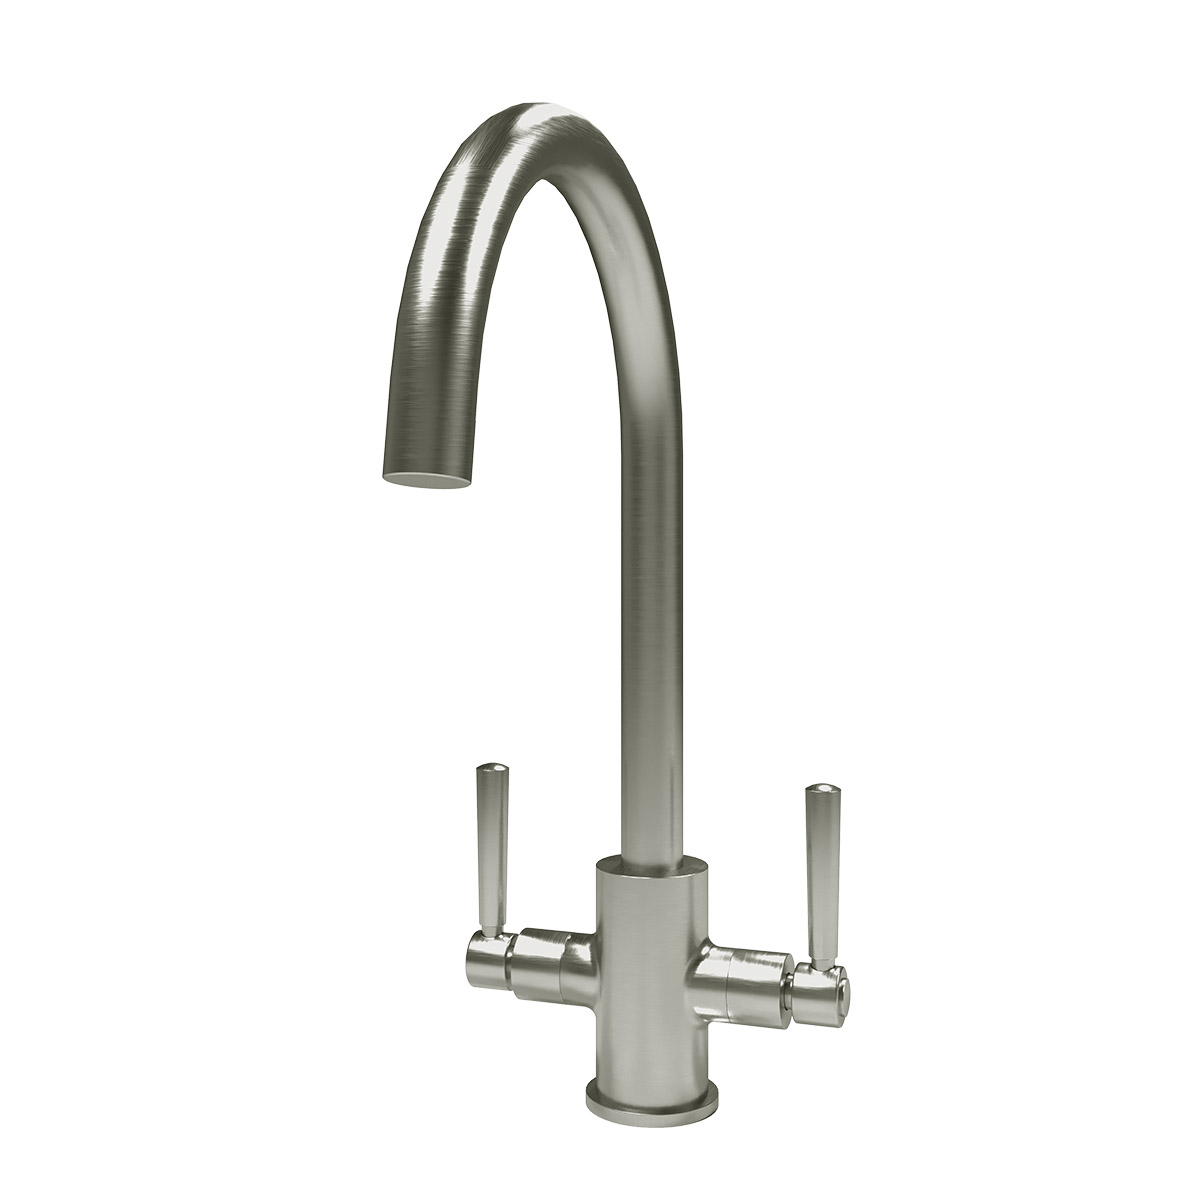 Noa dual lever kitchen tap in brushed chrome